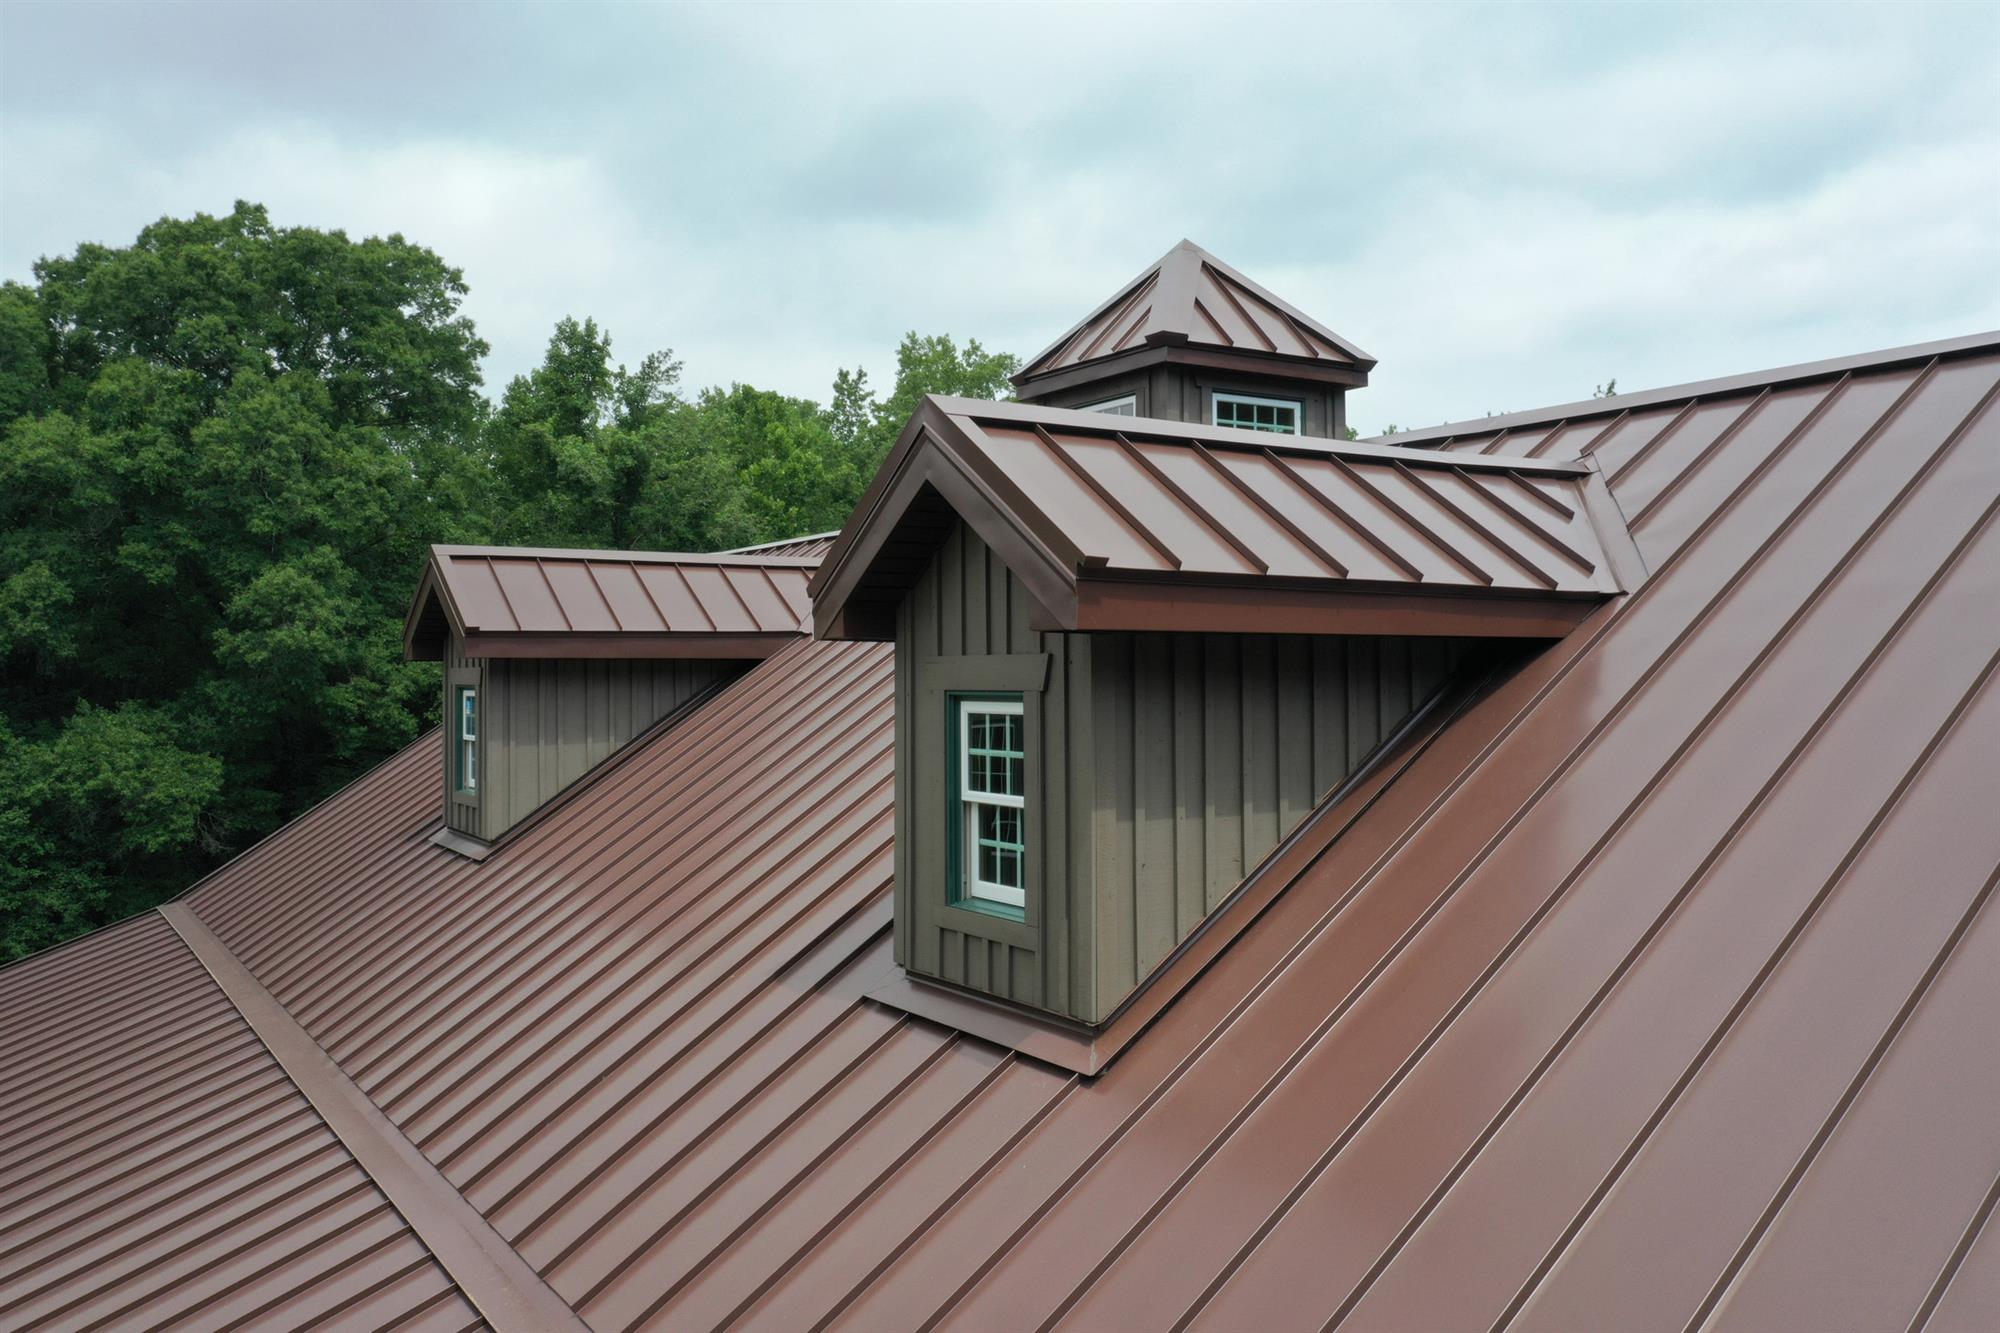 Roofing material options for roof replacements in WI